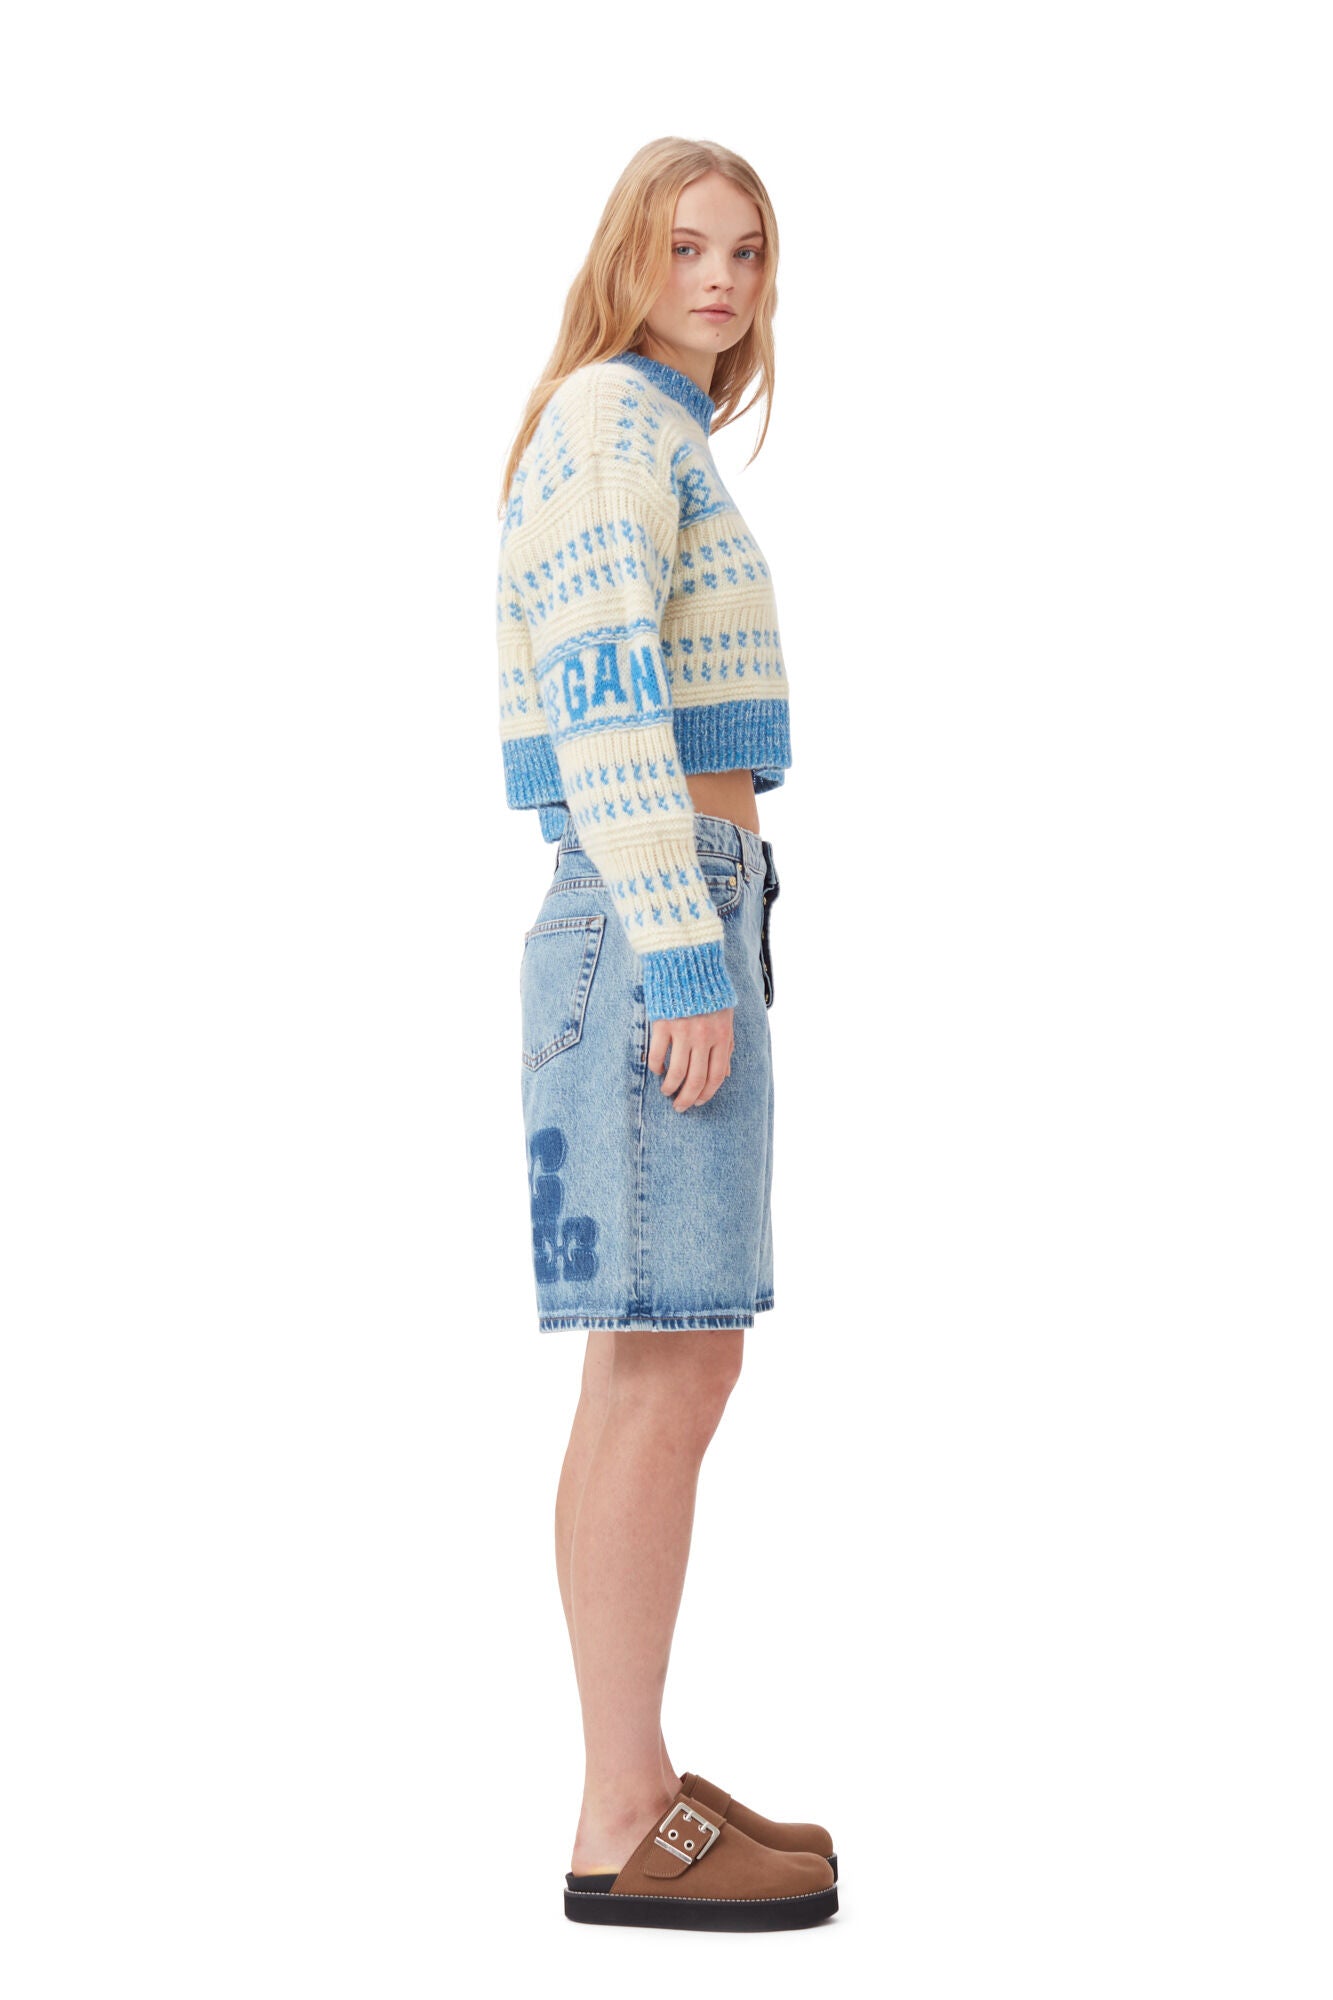 Ganni Graphic Lambswool Cropped O-Neck Strong Blue - hvittrad.no